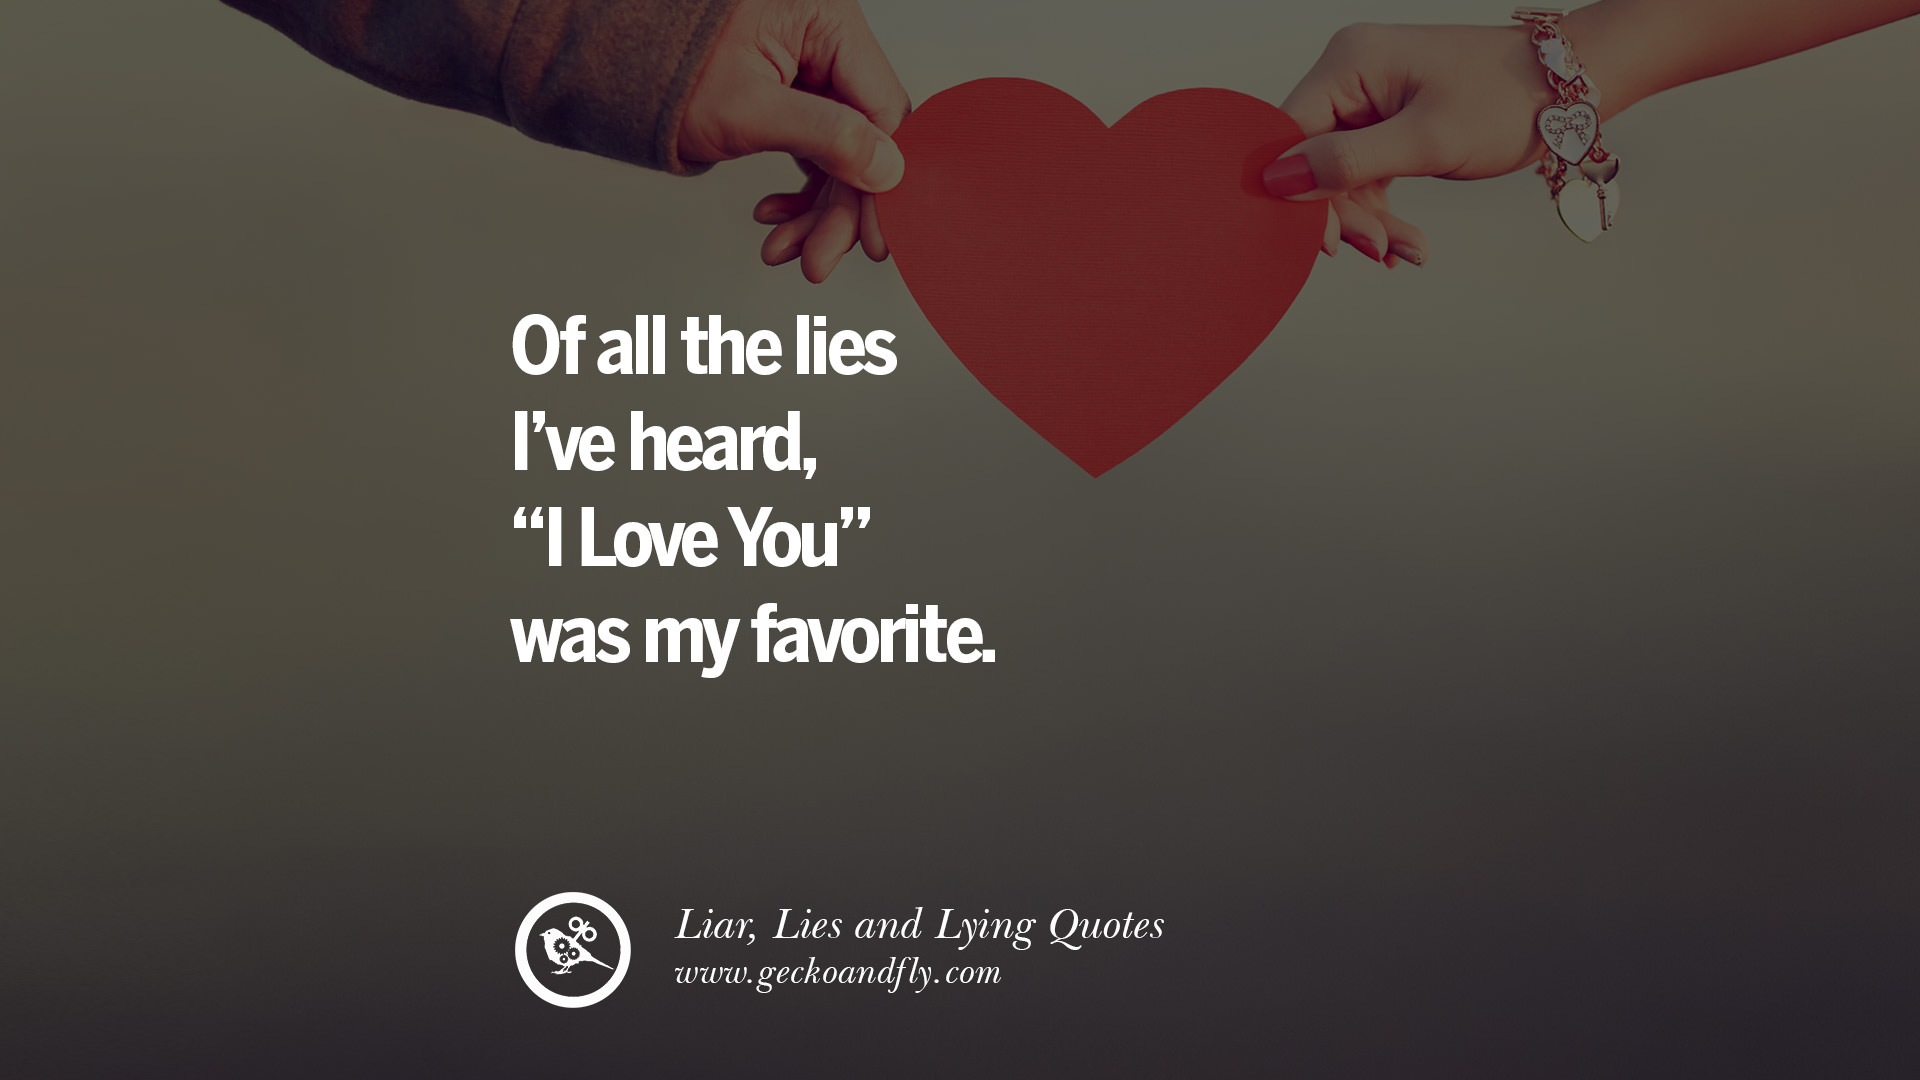 60 Quotes About Liar, Lies and Lying Boyfriend In A Relationship. 